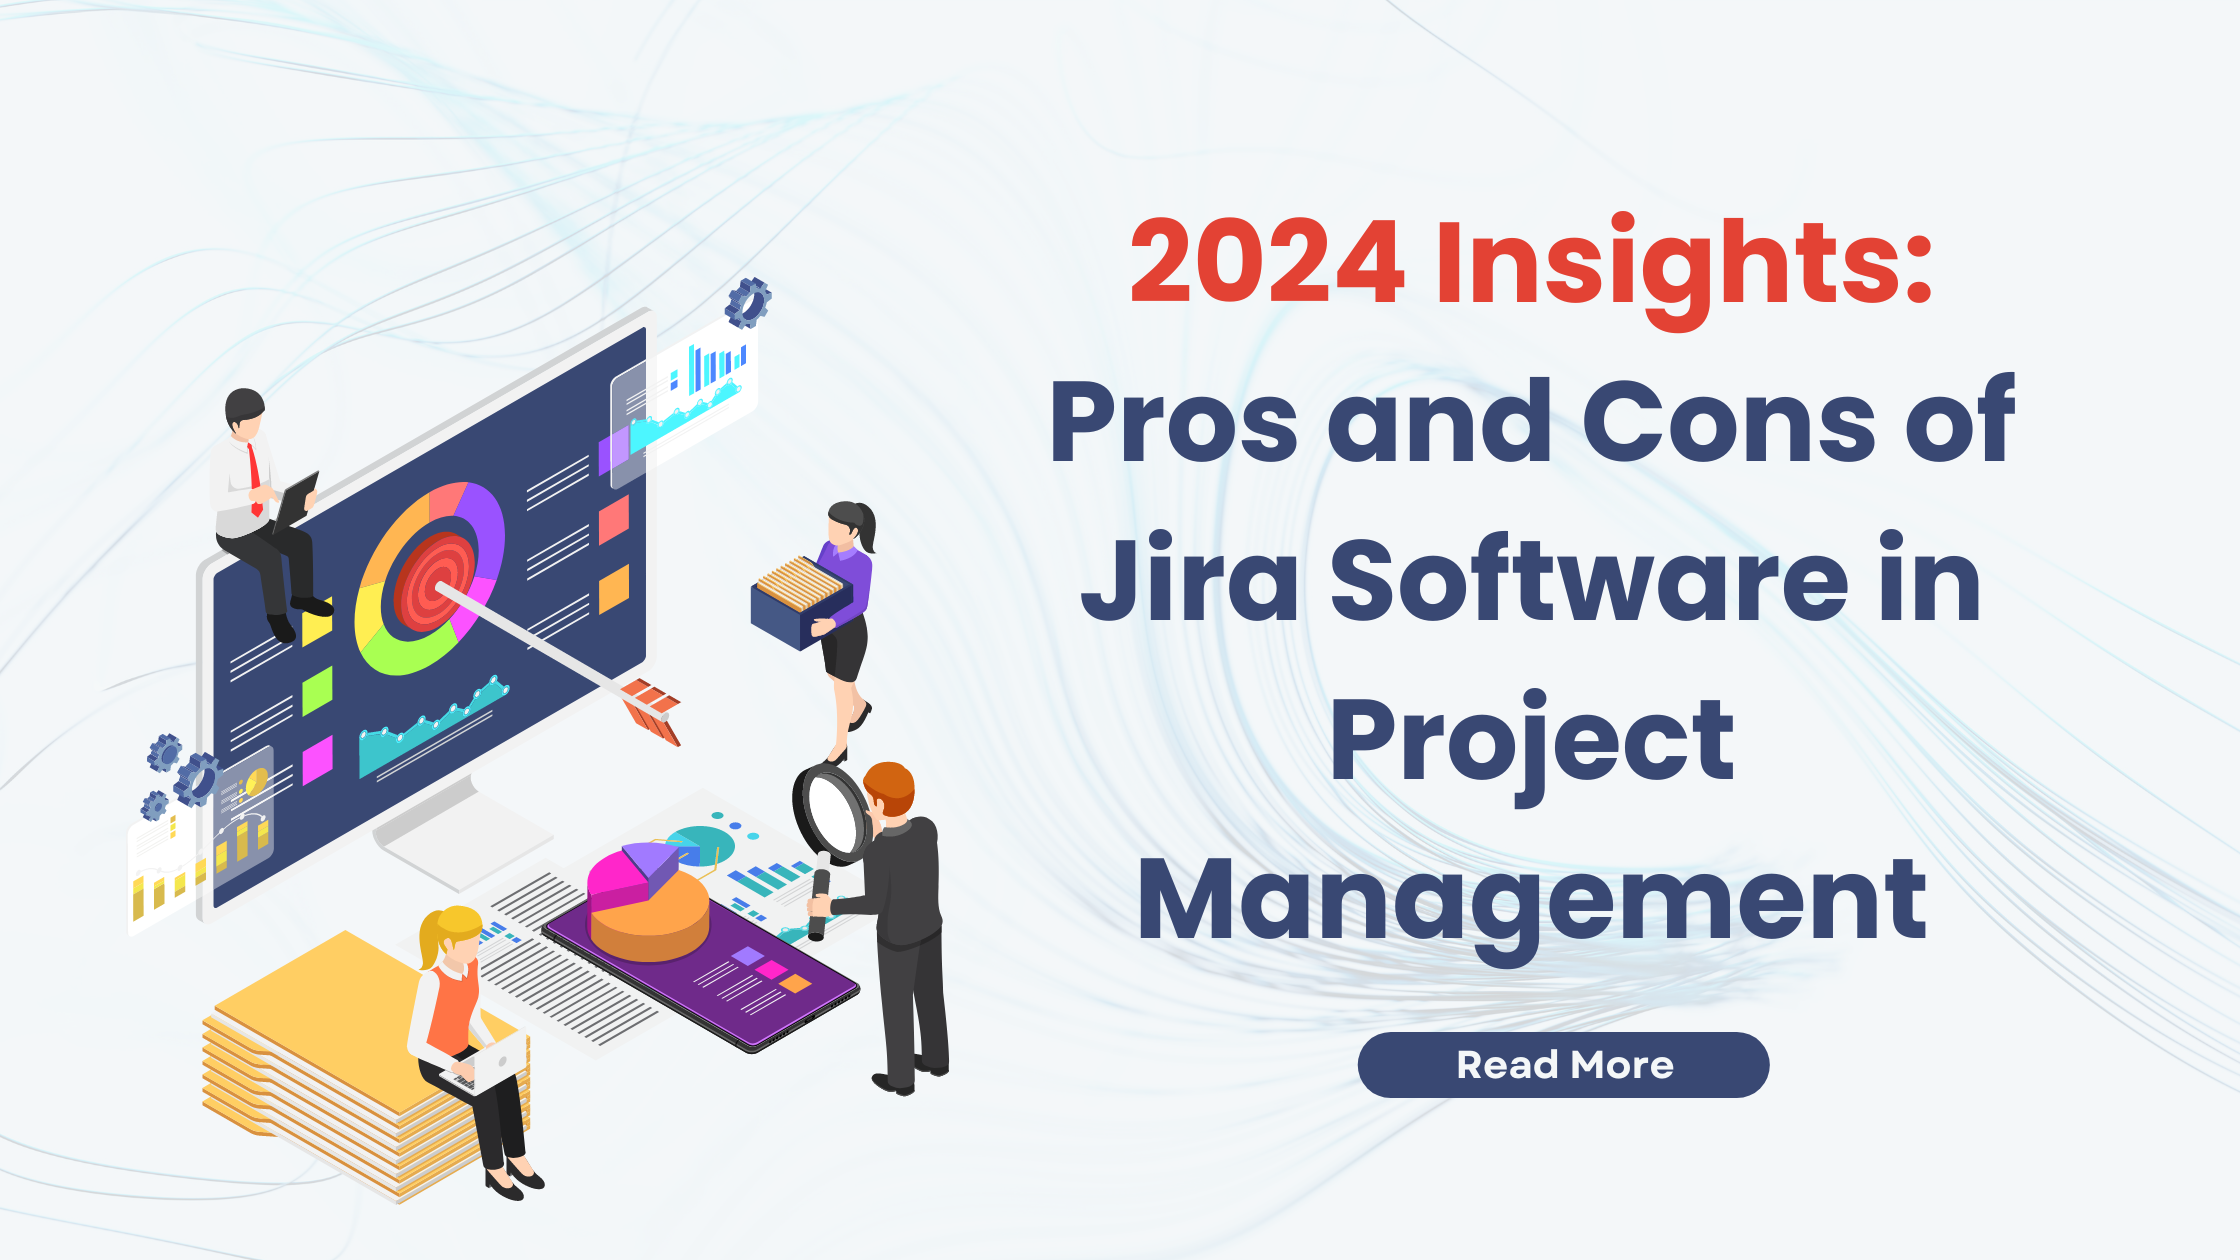 Pros and Cons of Jira Software for Project Management in 2024 